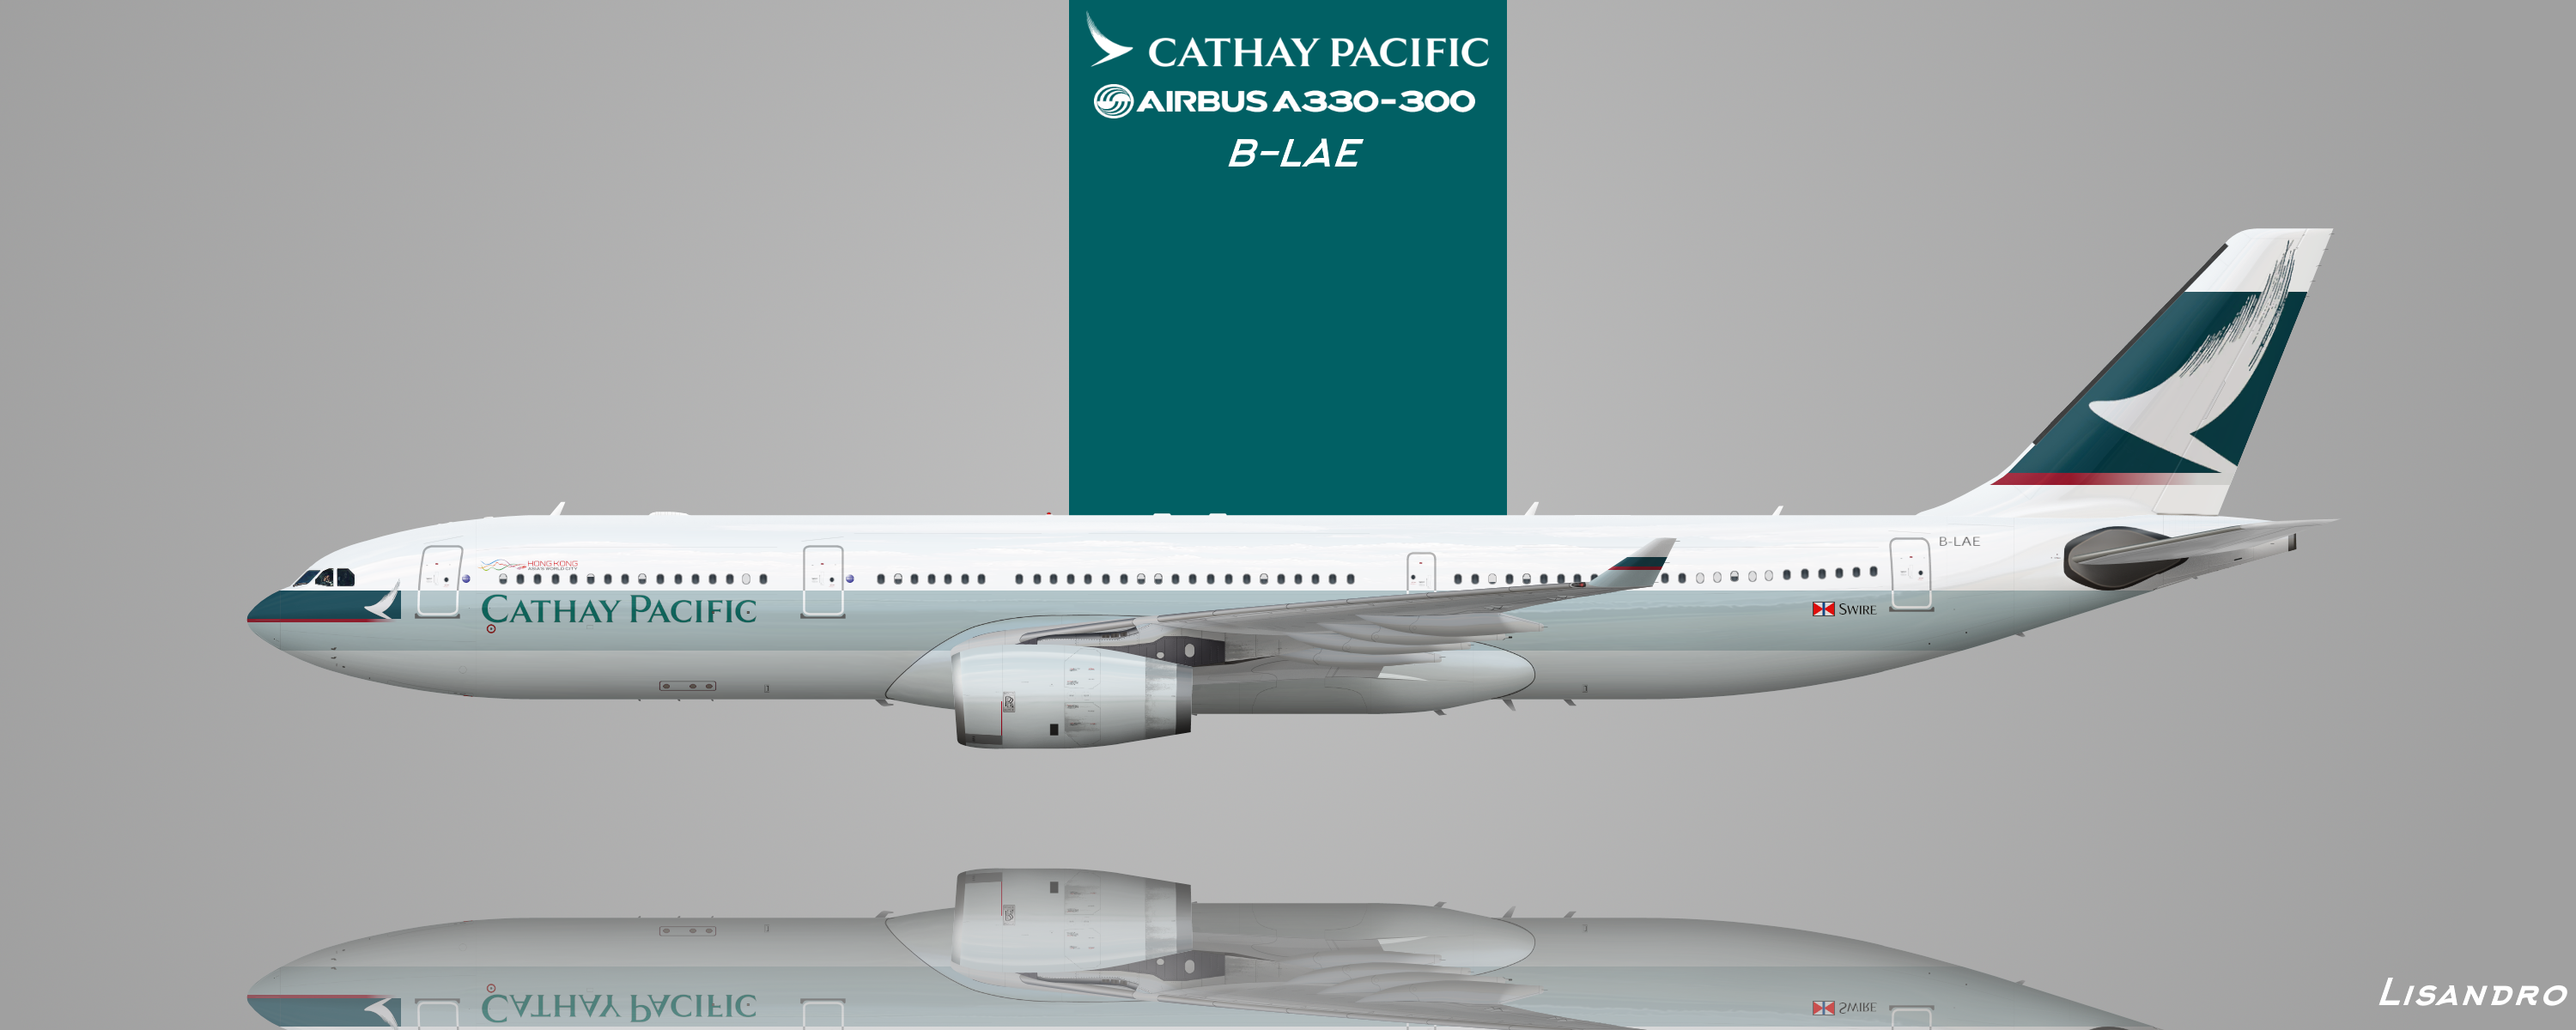 Airbus A330 342 Cathay Pacific B Lae Real Airline Liveries And Concepts Gallery Empires